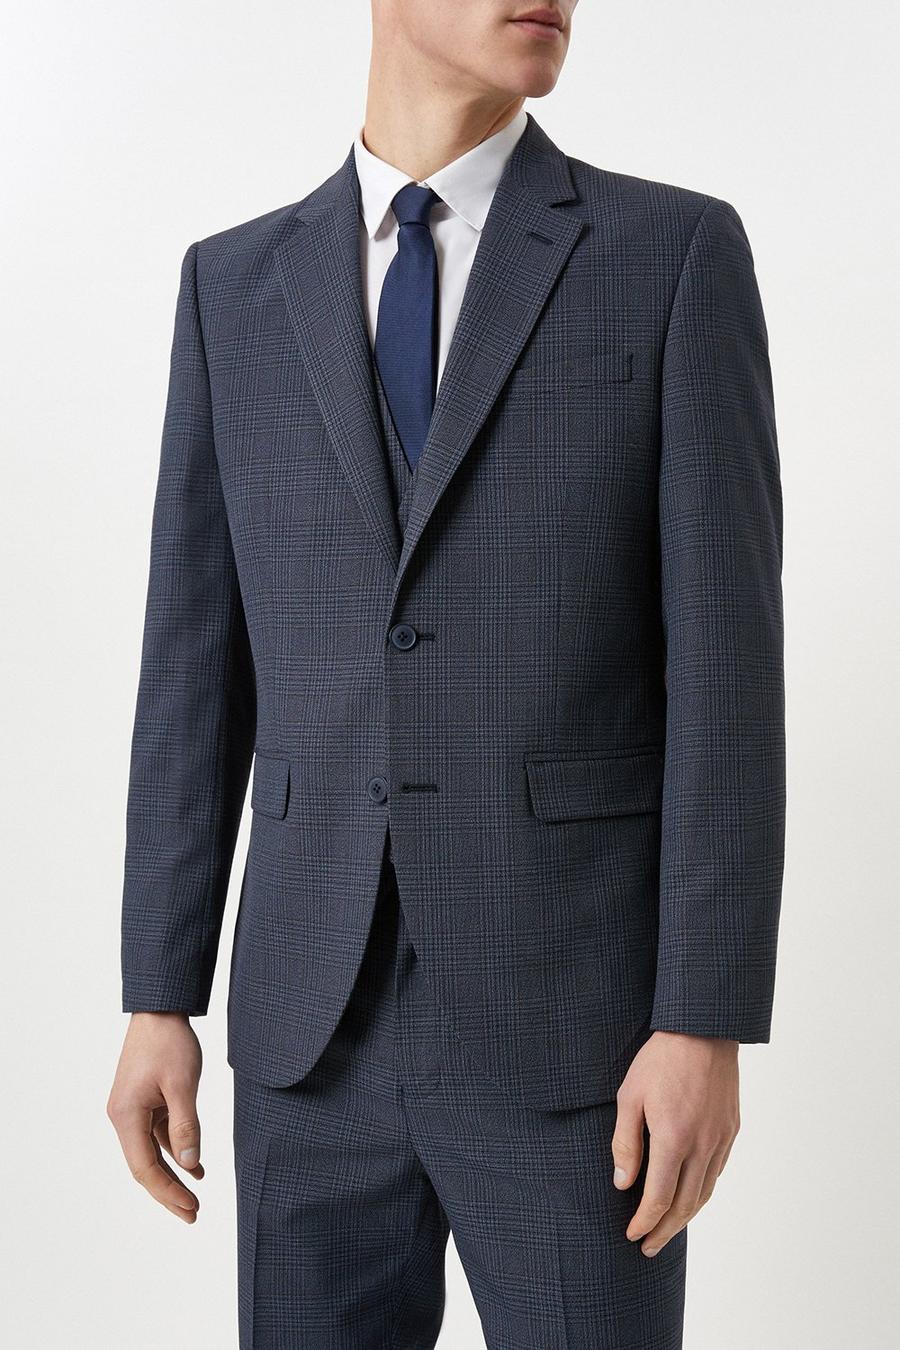 Tailored Fit Navy Overcheck Suit Jacket